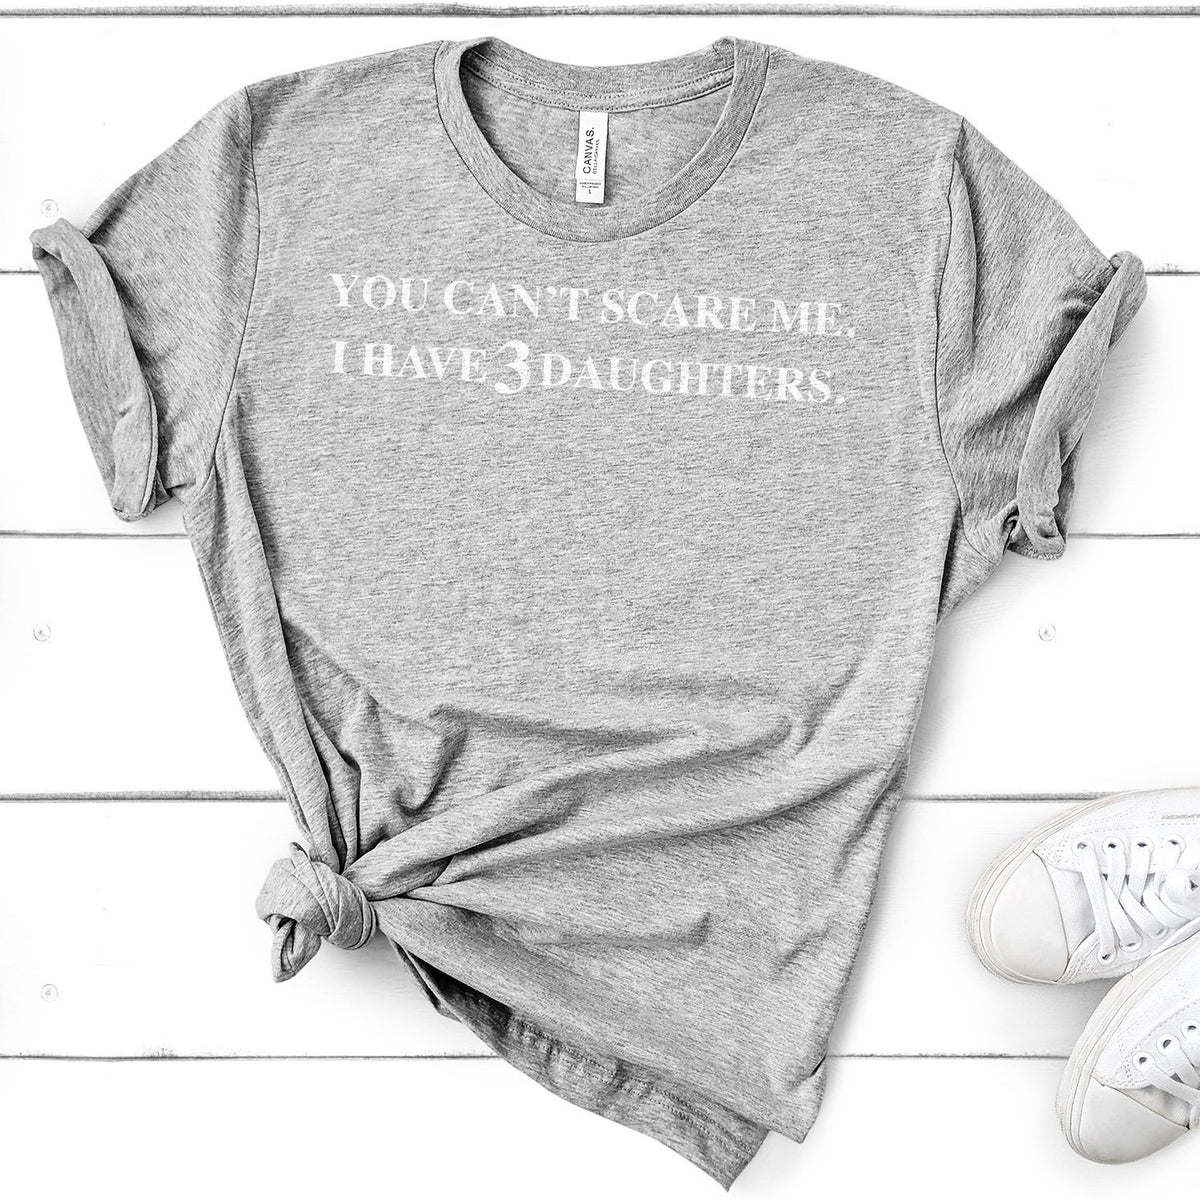 You Can&#39;t Scare Me I Have 3 Daughters - Short Sleeve Tee Shirt